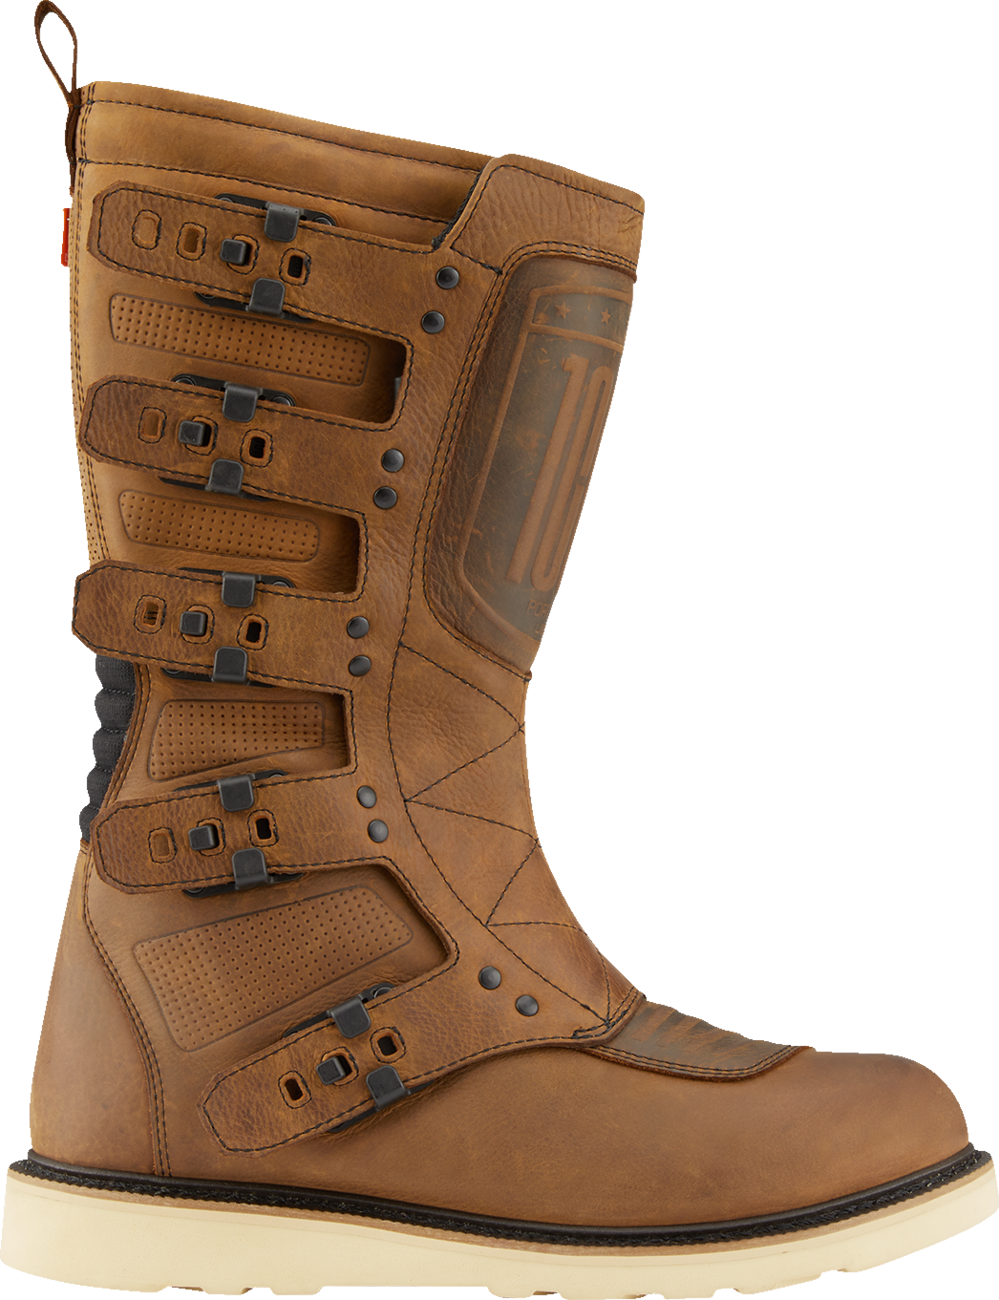 ICON Elsinore 2™ CE Boots - Brown - Size 10 3403-1225